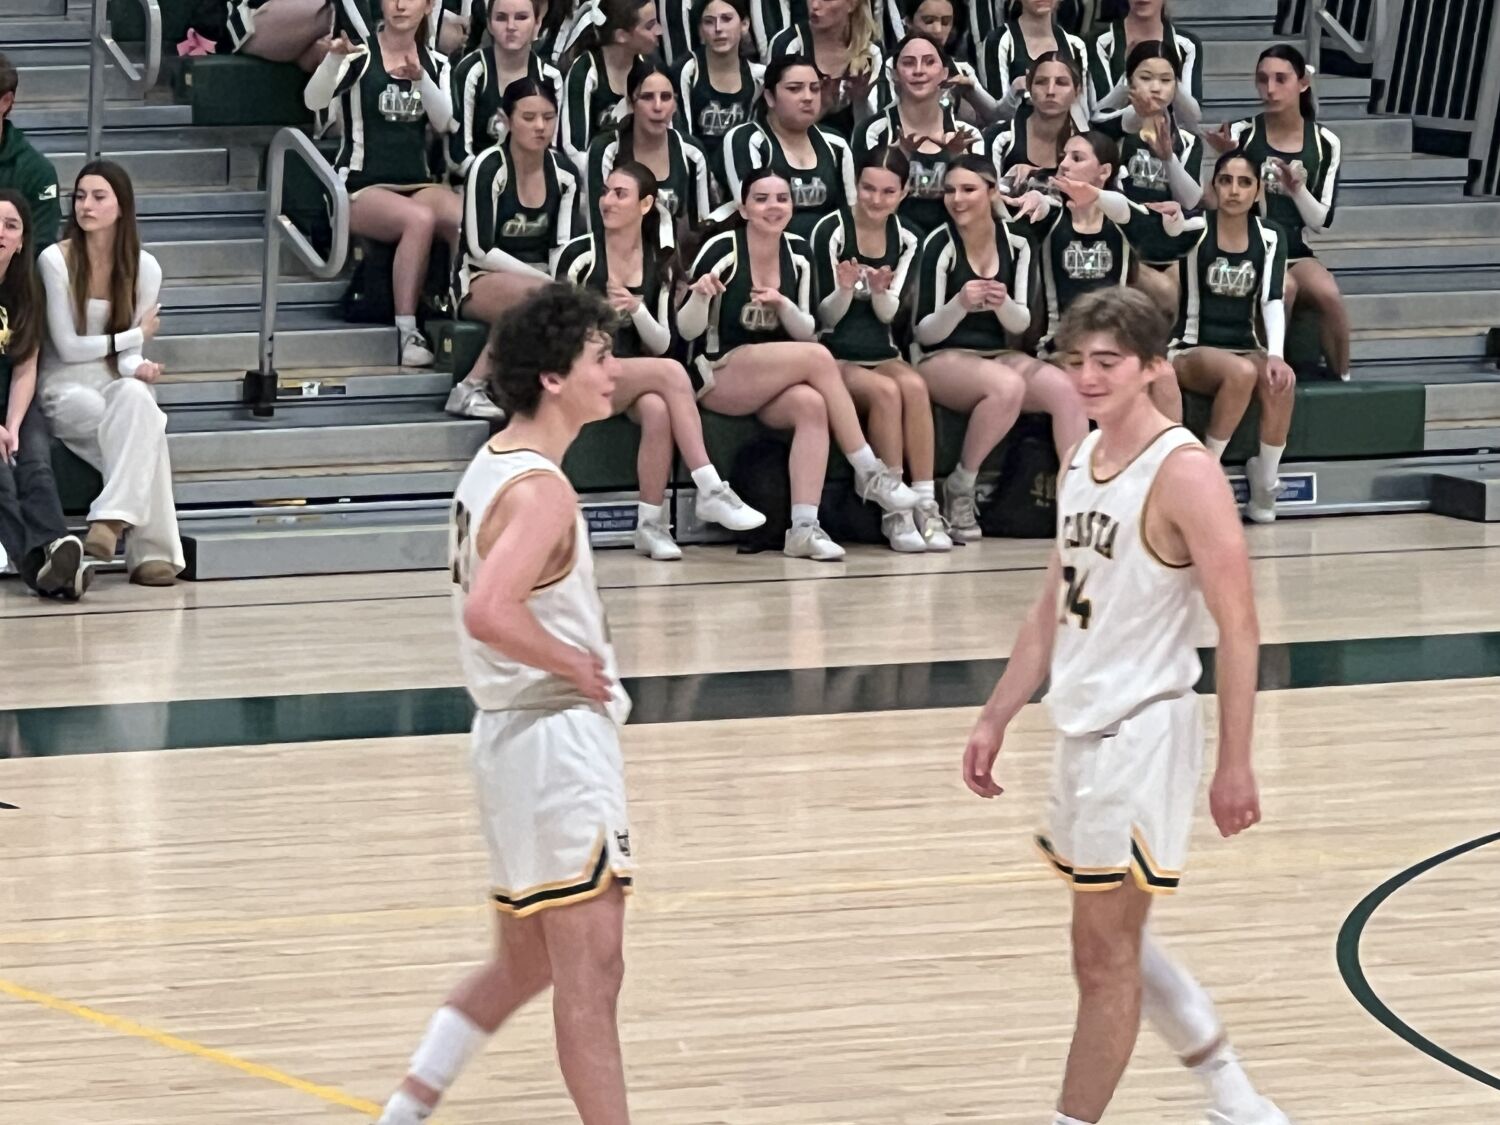 Mira Costa improves to 22-1 with another impressive team performance